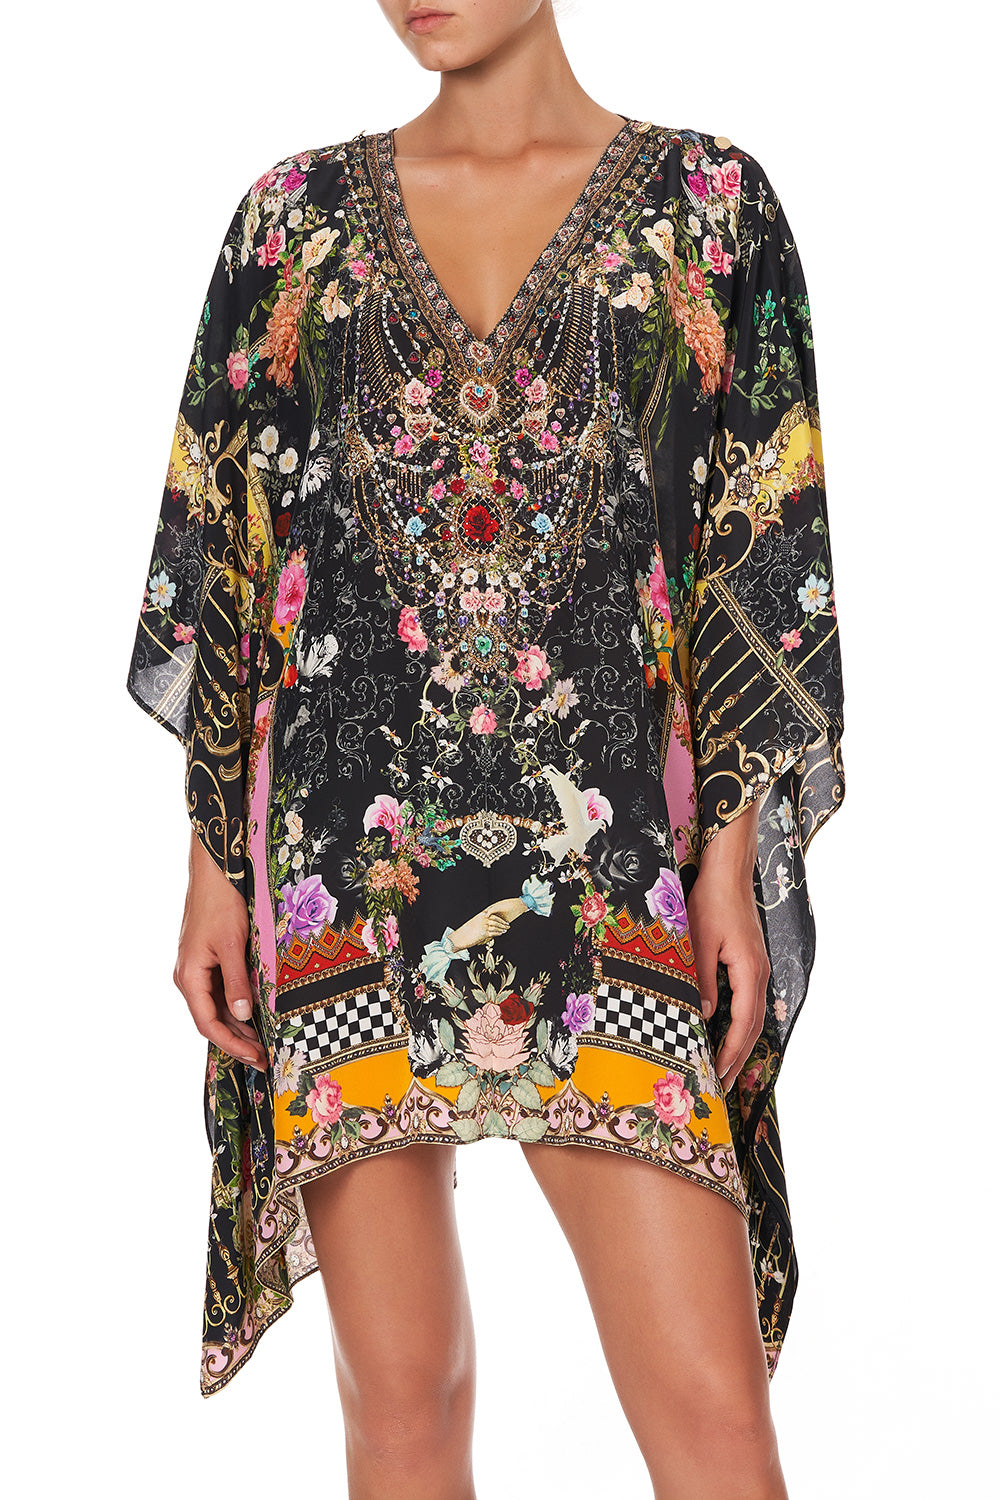 MIDI KAFTAN WITH BUTTON UP SLEEVES MONTAGUES CAPULET